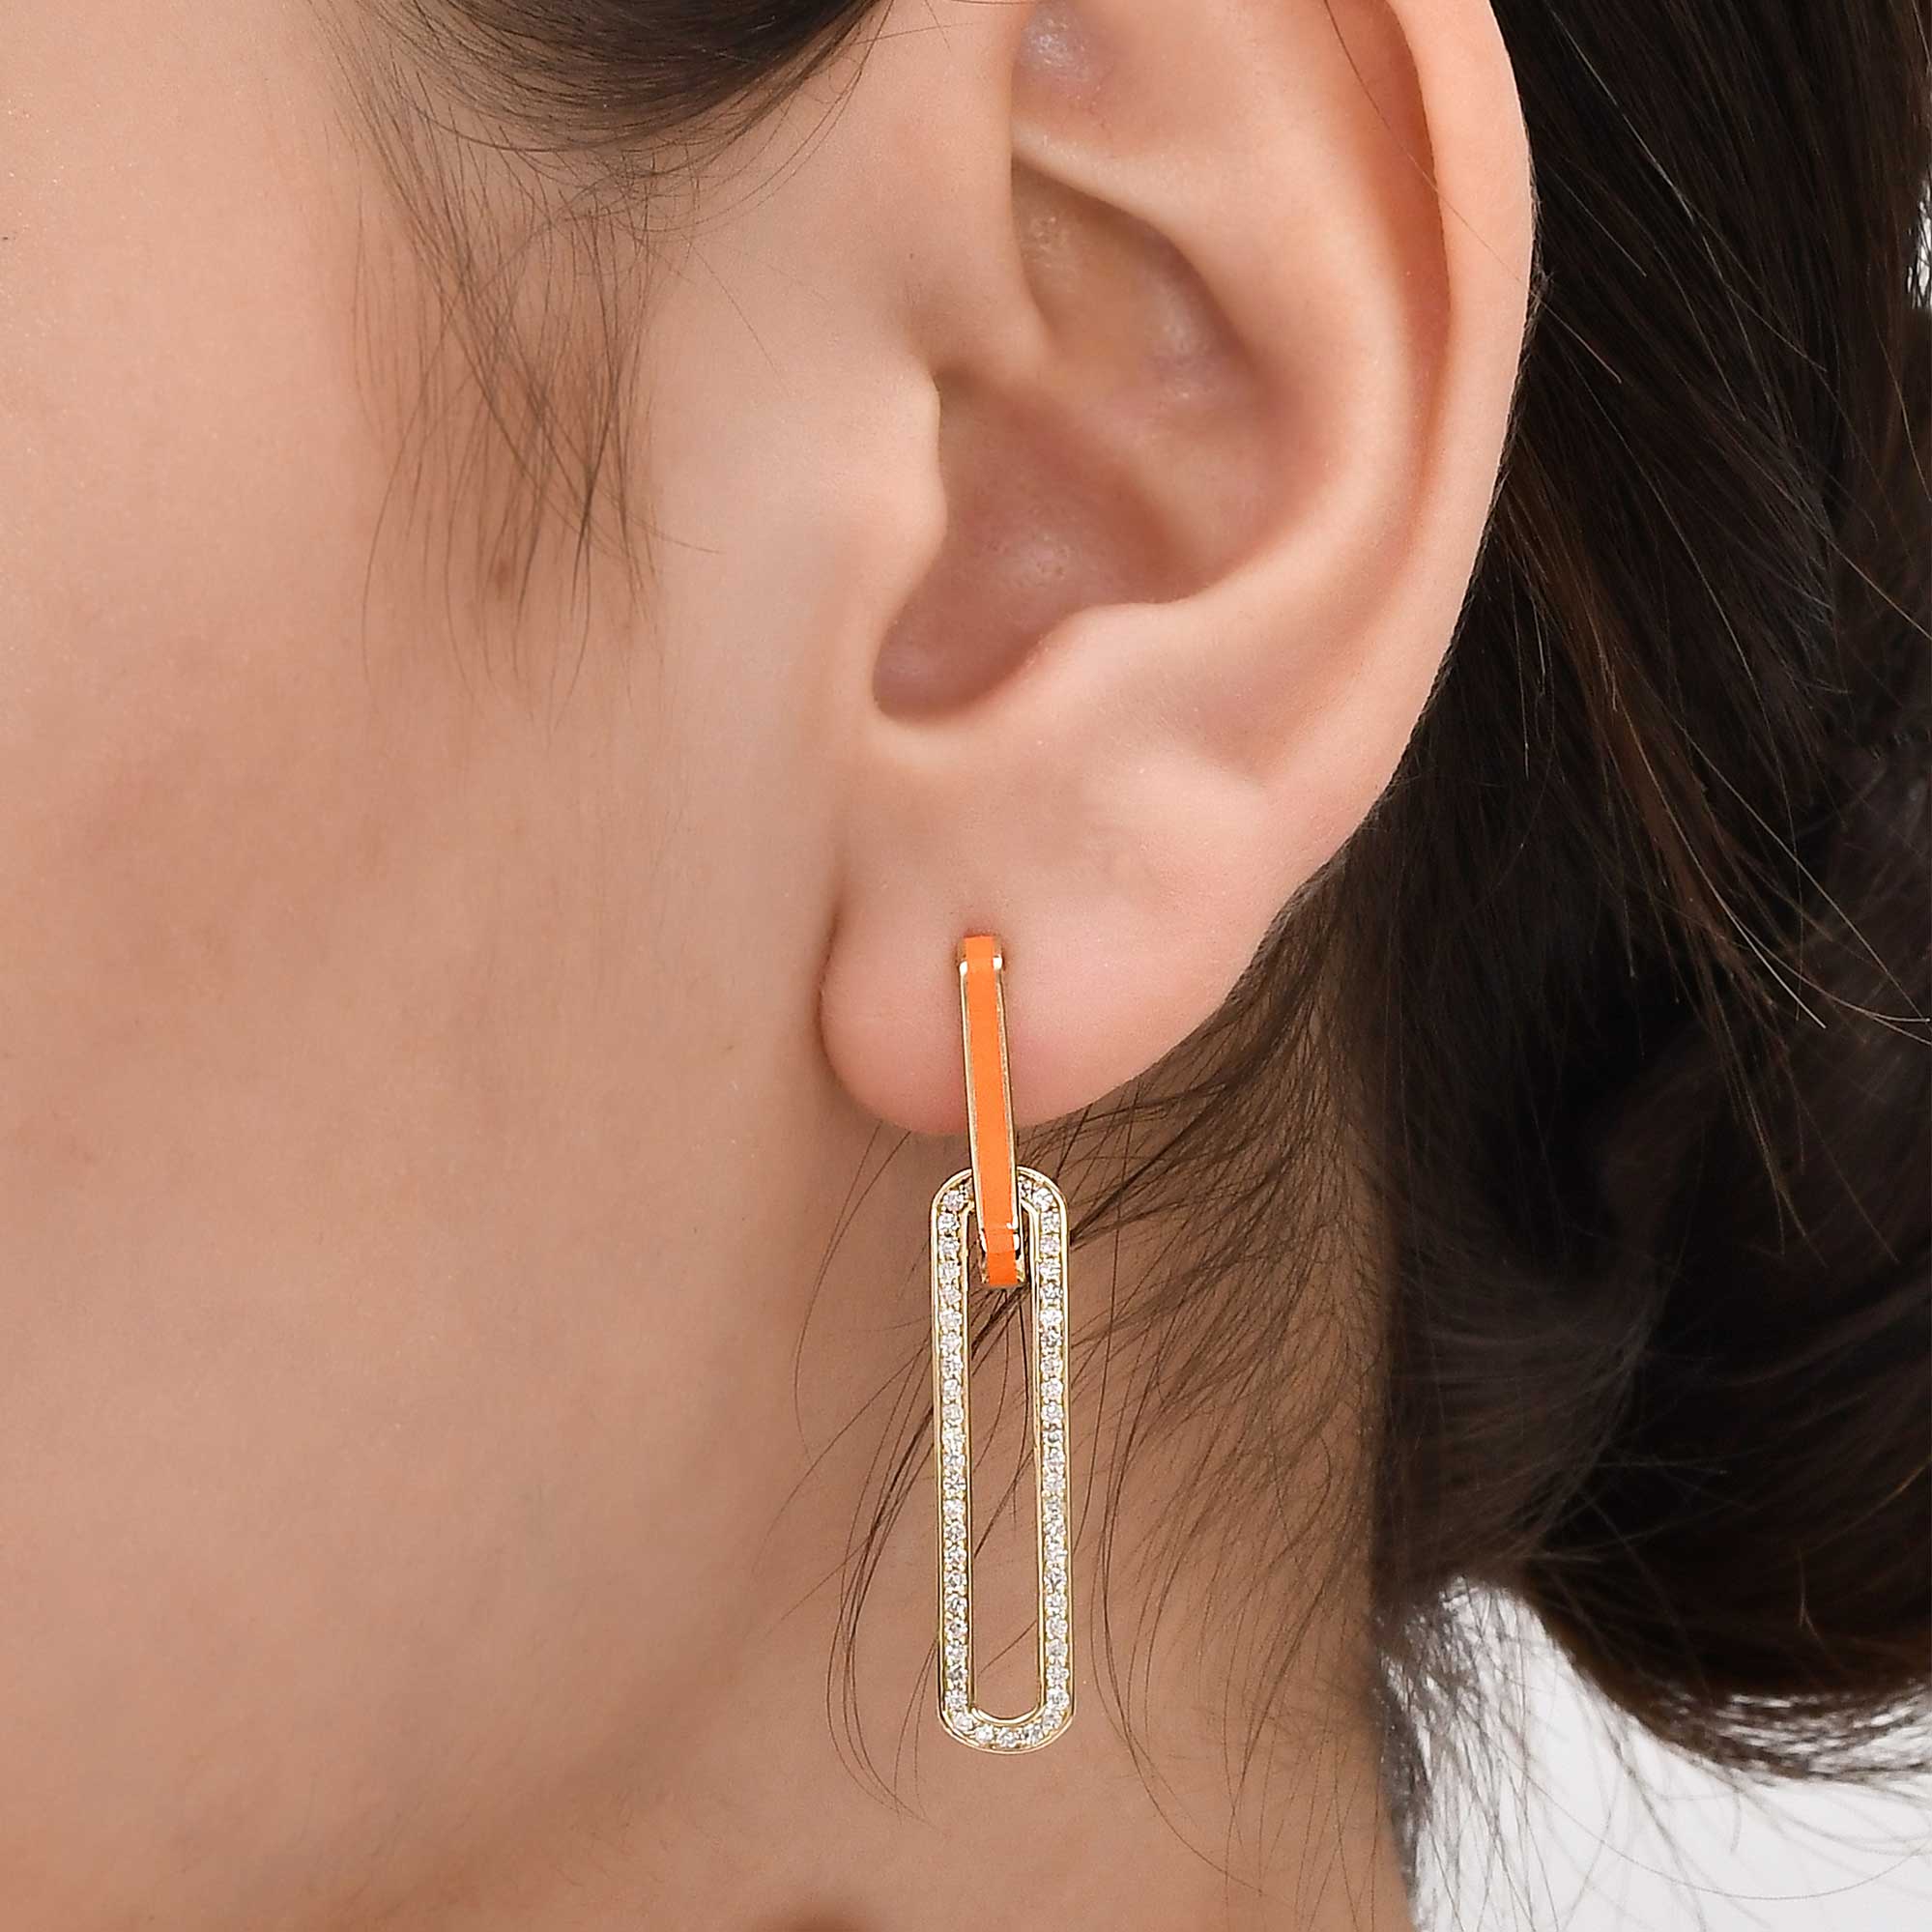 ATTACH EARING